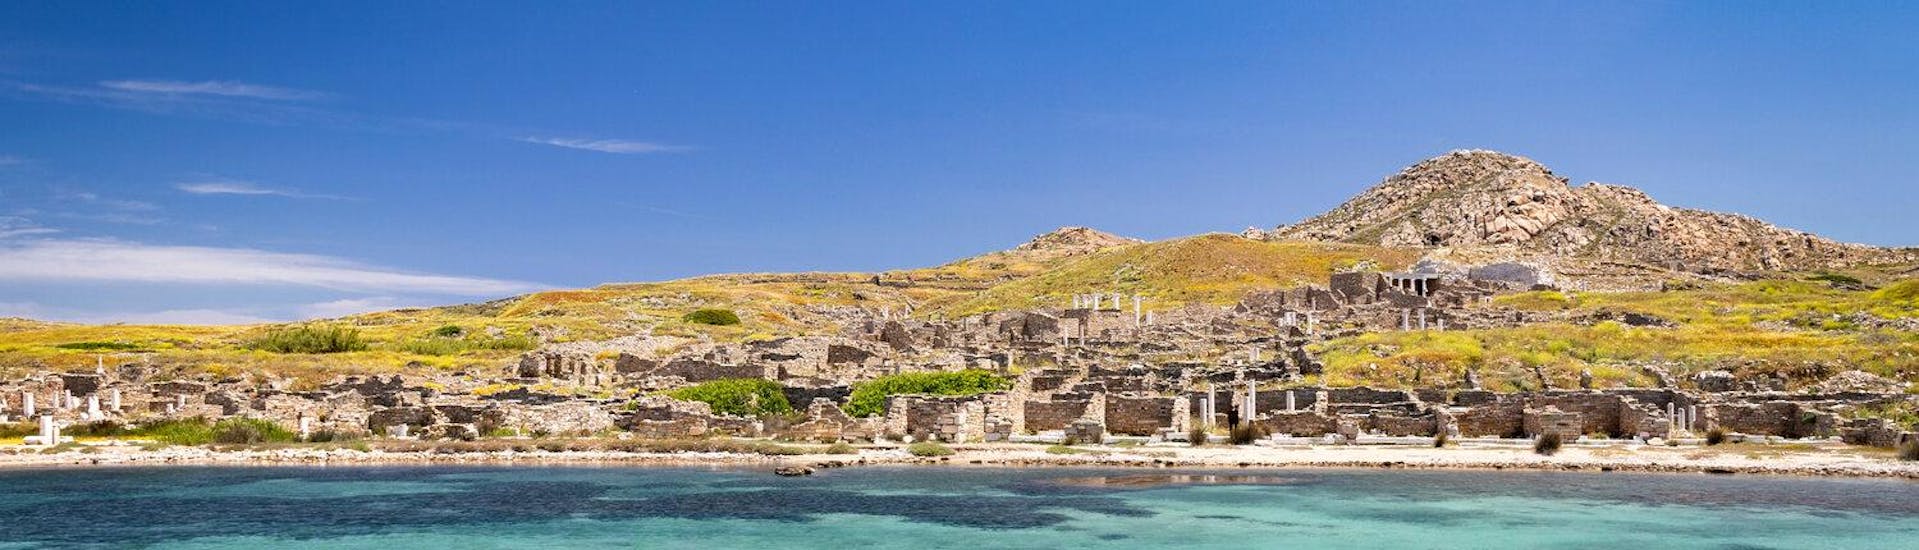 View of the island during a boat trip to Delos.